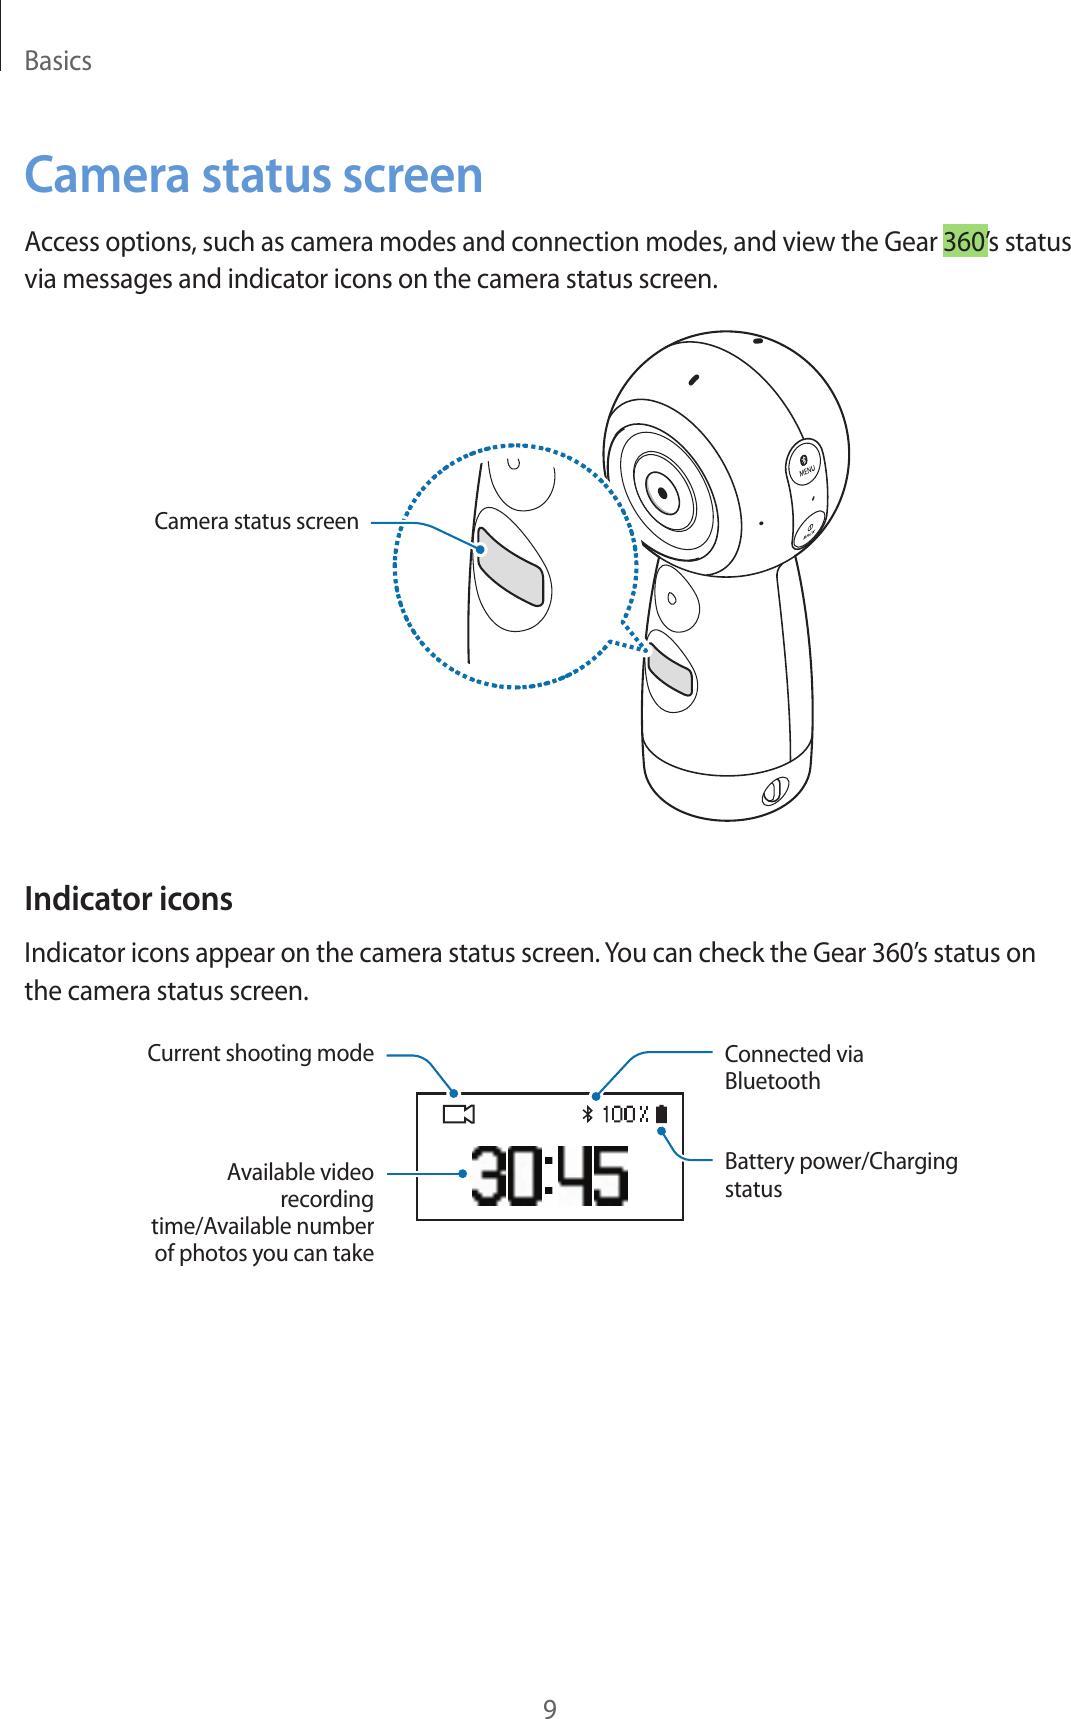 Basics9Camera status screenAccess options, such as camera modes and connection modes, and view the Gear 360’s status via messages and indicator icons on the camera status screen.Camera status screenIndicator iconsIndicator icons appear on the camera status screen. You can check the Gear 360’s status on the camera status screen.Current shooting modeAvailable video recording time/Available number of photos you can takeConnected via BluetoothBattery power/Charging status